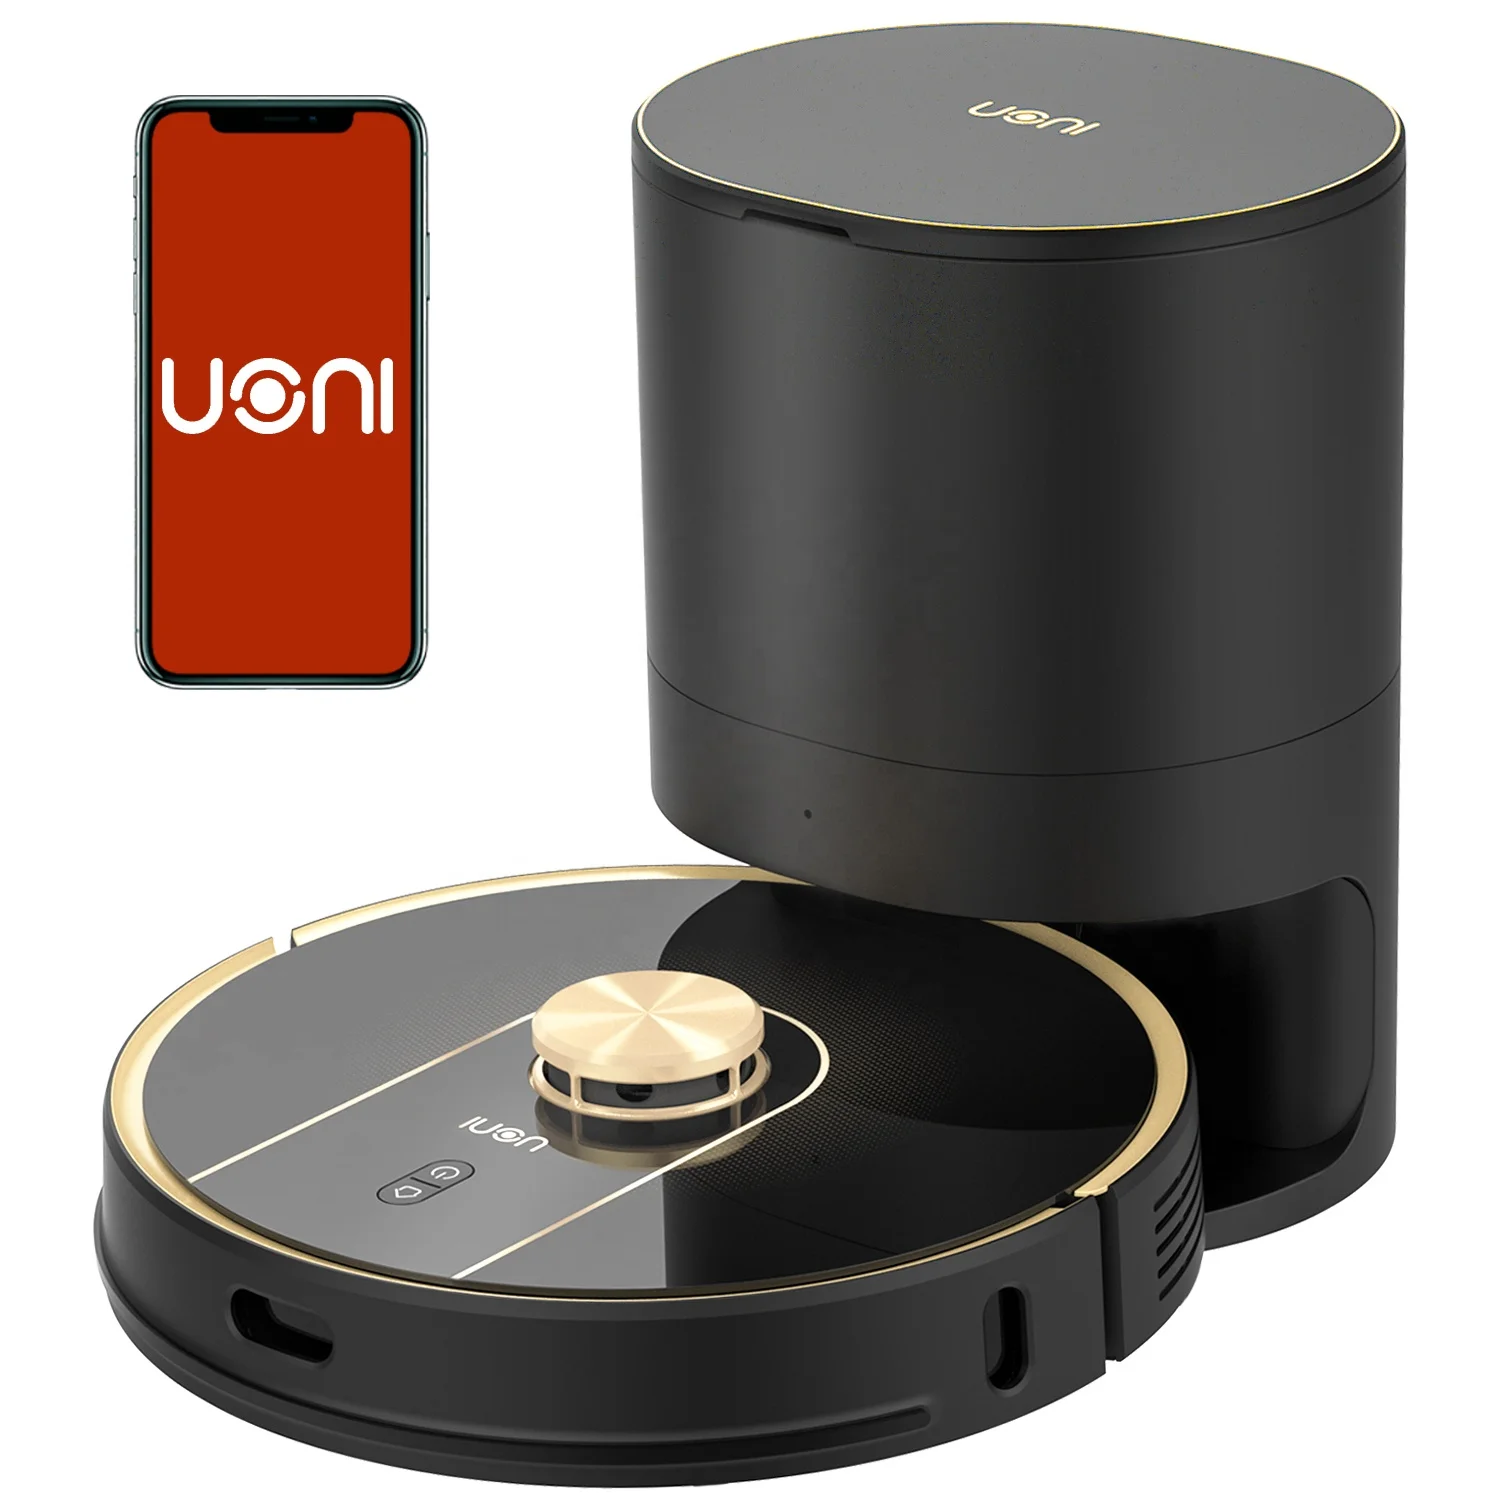 

Uoni V980 Plus with self-emptying dustbin sweeping robot automatic cleaning robot narwal vacuum mi robot vacuum cleaner